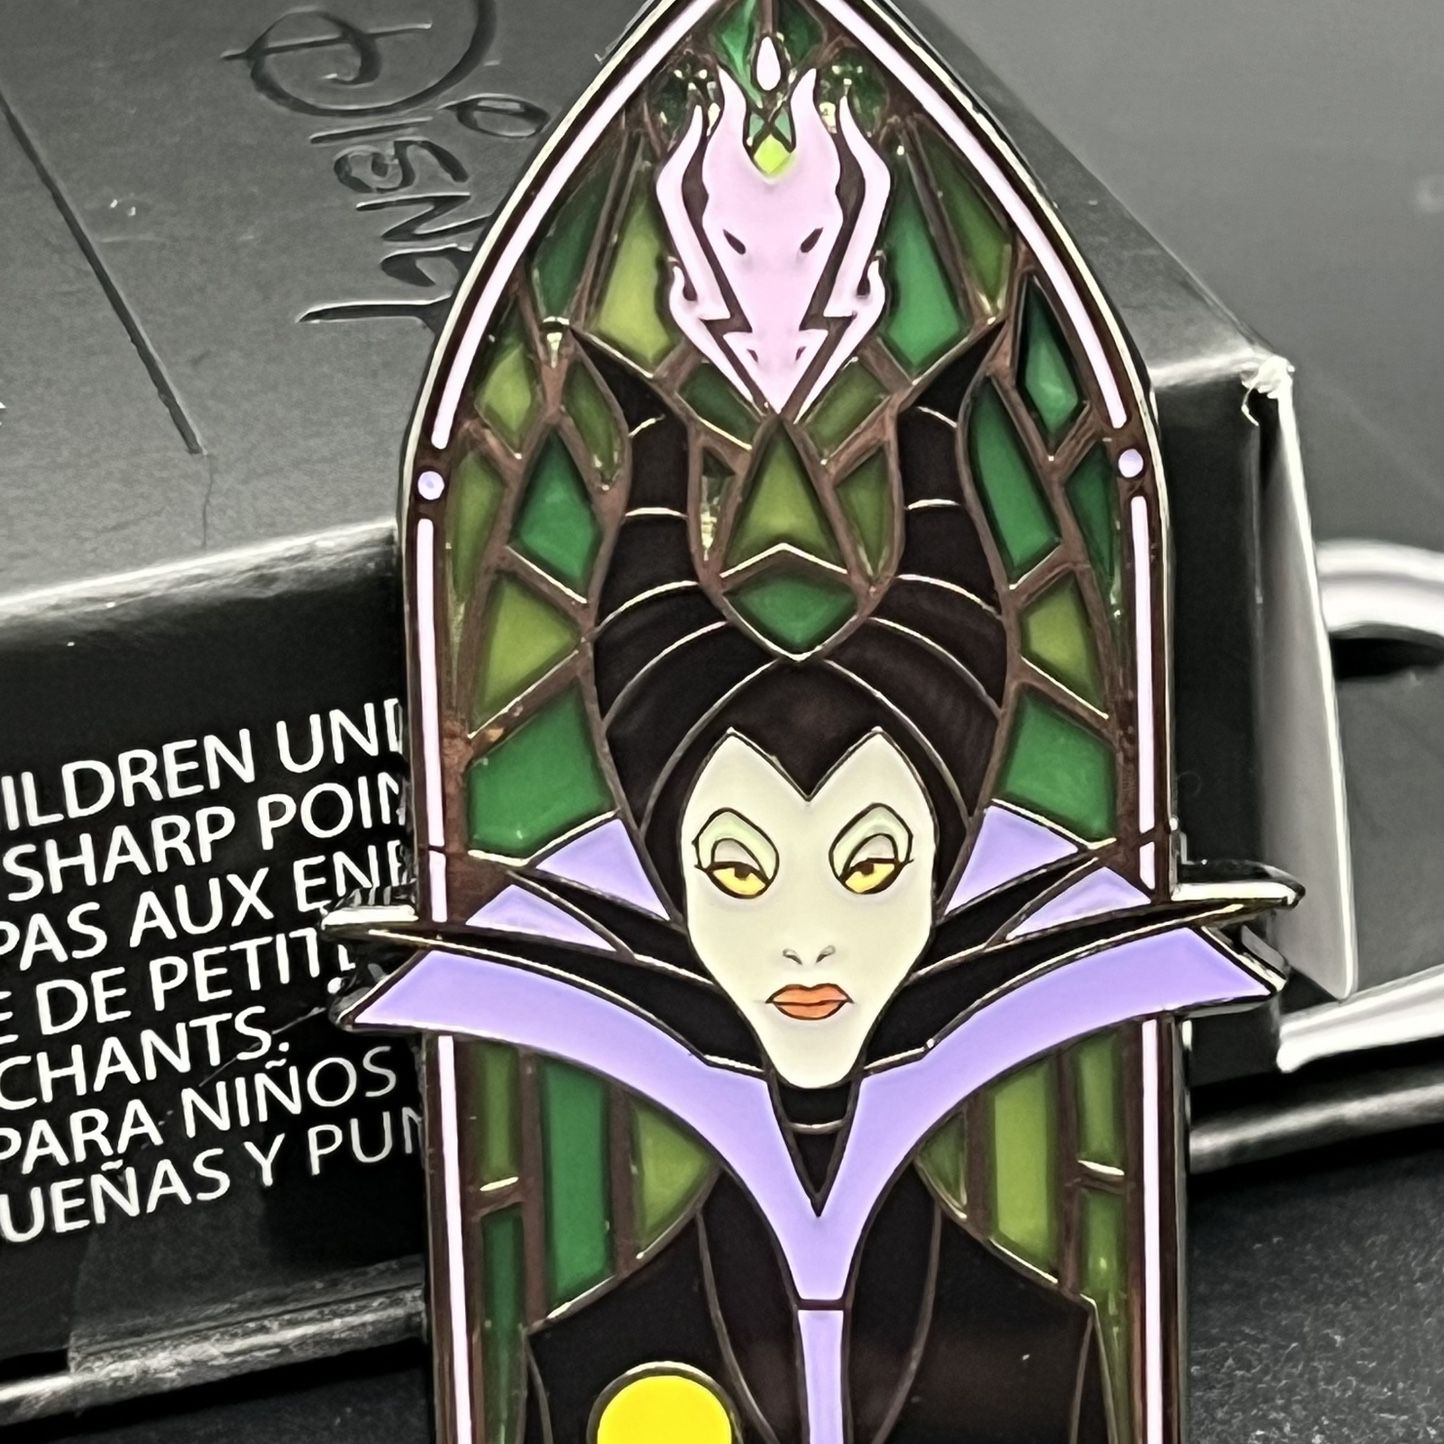 New Disney Parks Loungefly Maleficent Wallet for Sale in Artesia, CA -  OfferUp